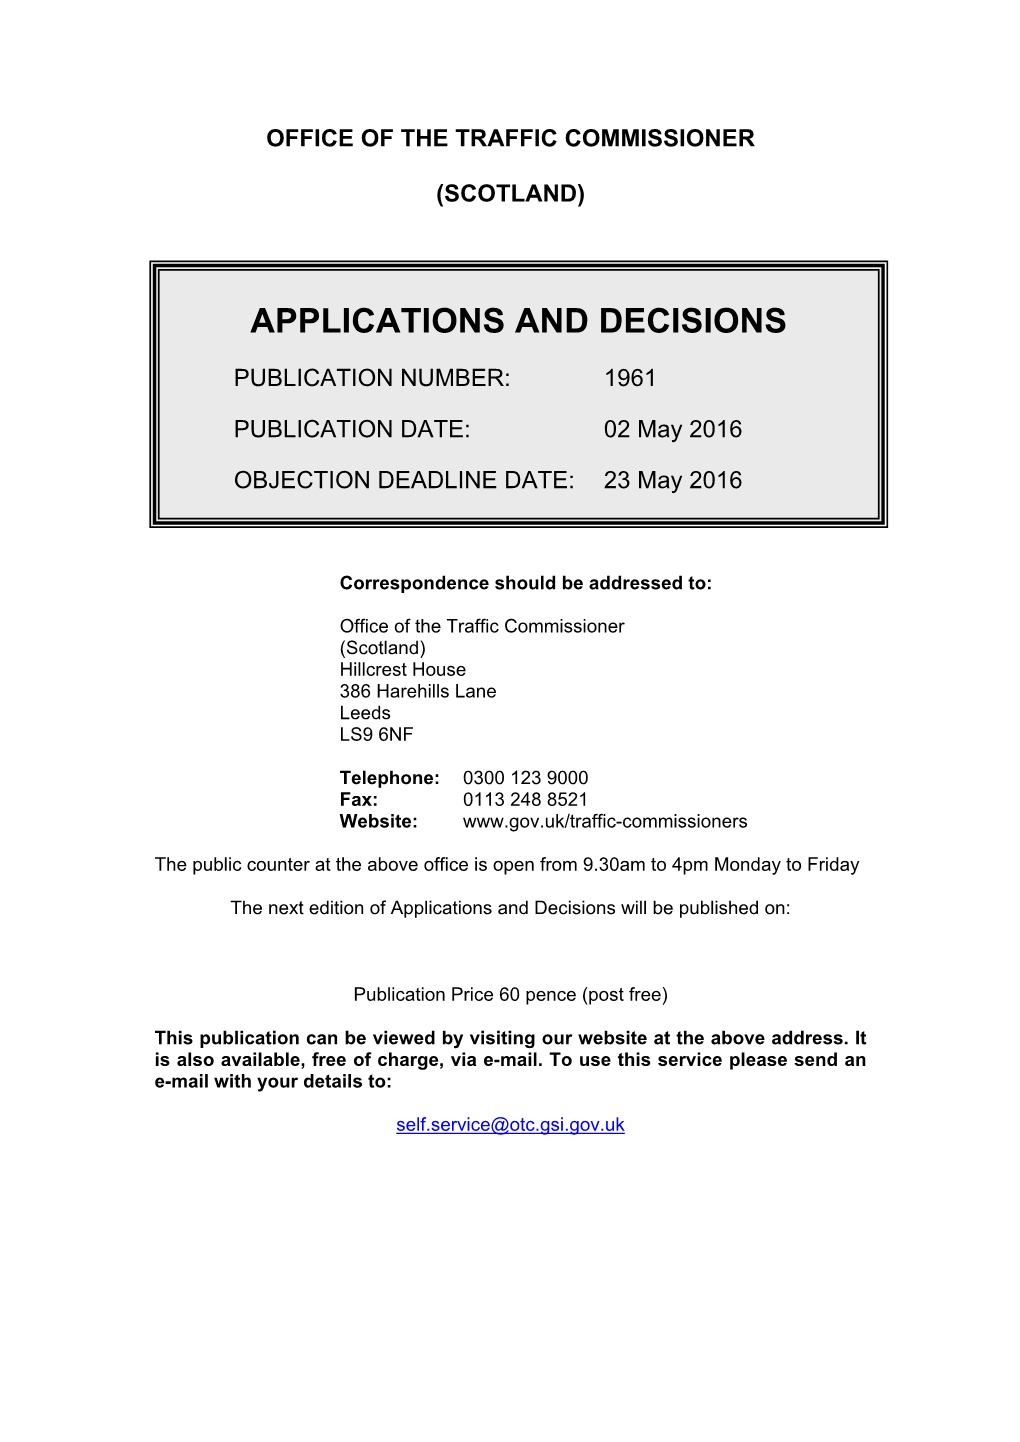 Applications and Decisions: Scotland: 2 May 2016